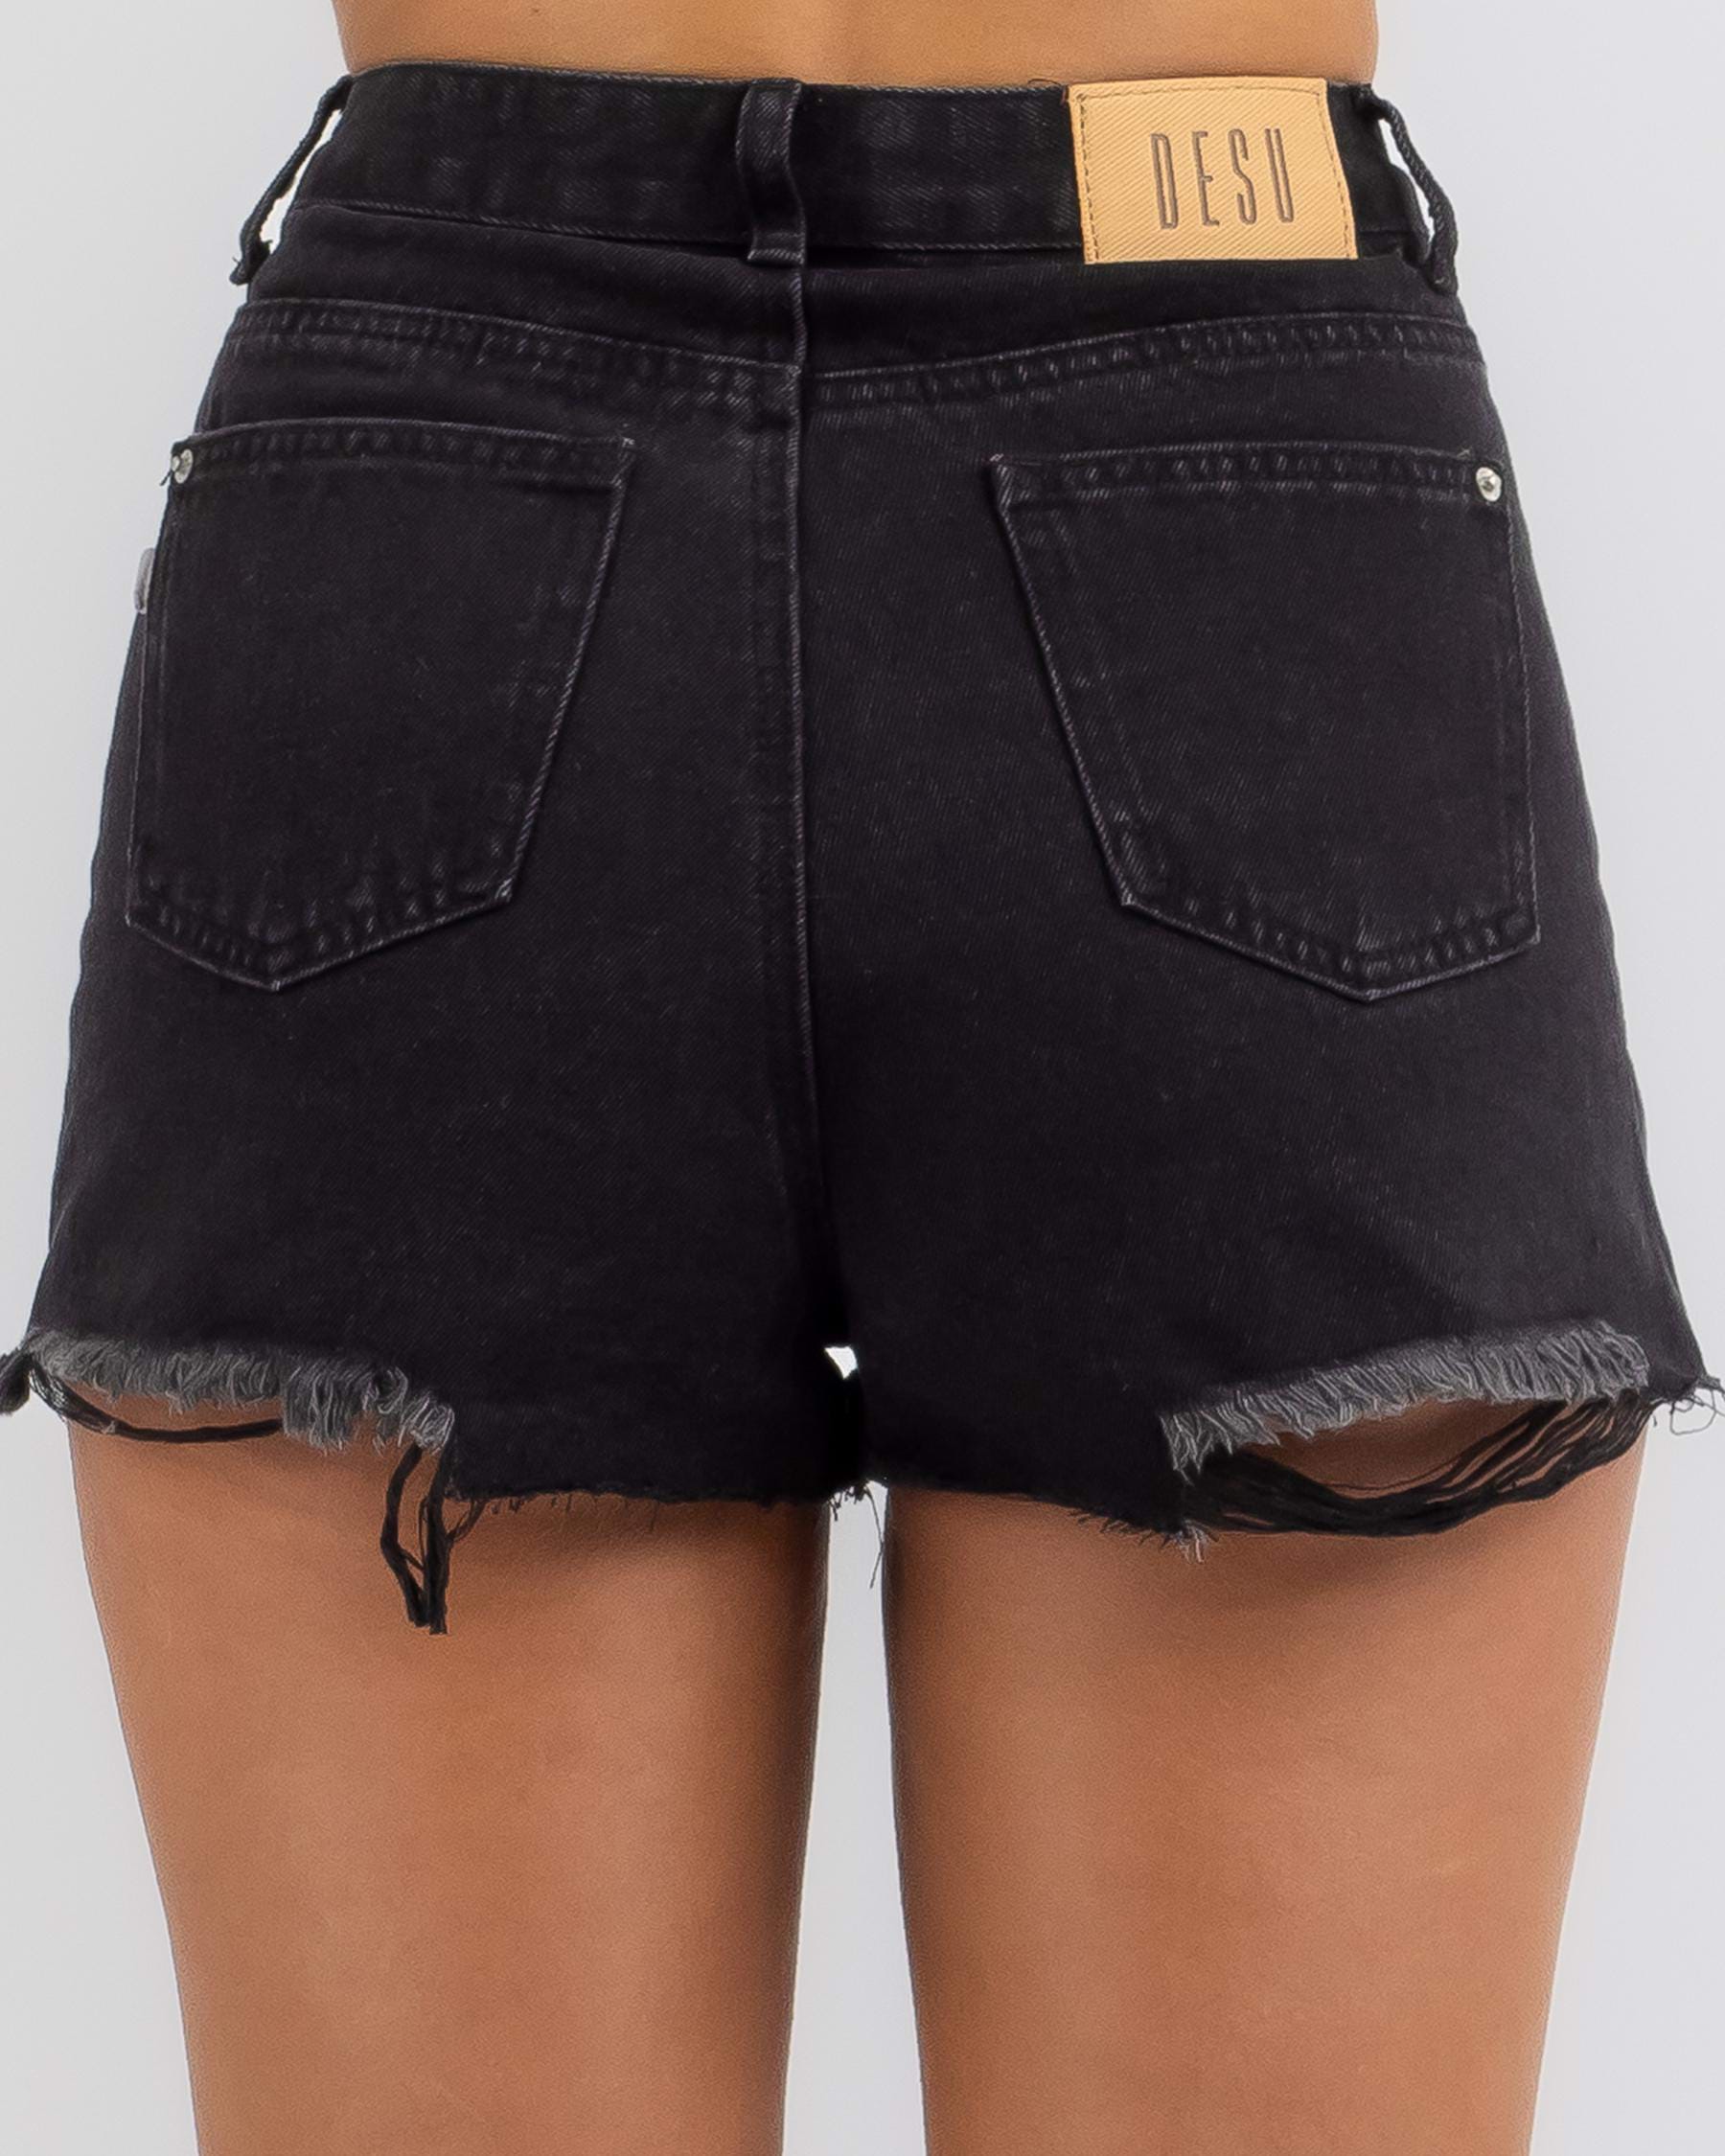 DESU Kelsey Shorts In Washed Black - Fast Shipping & Easy Returns ...